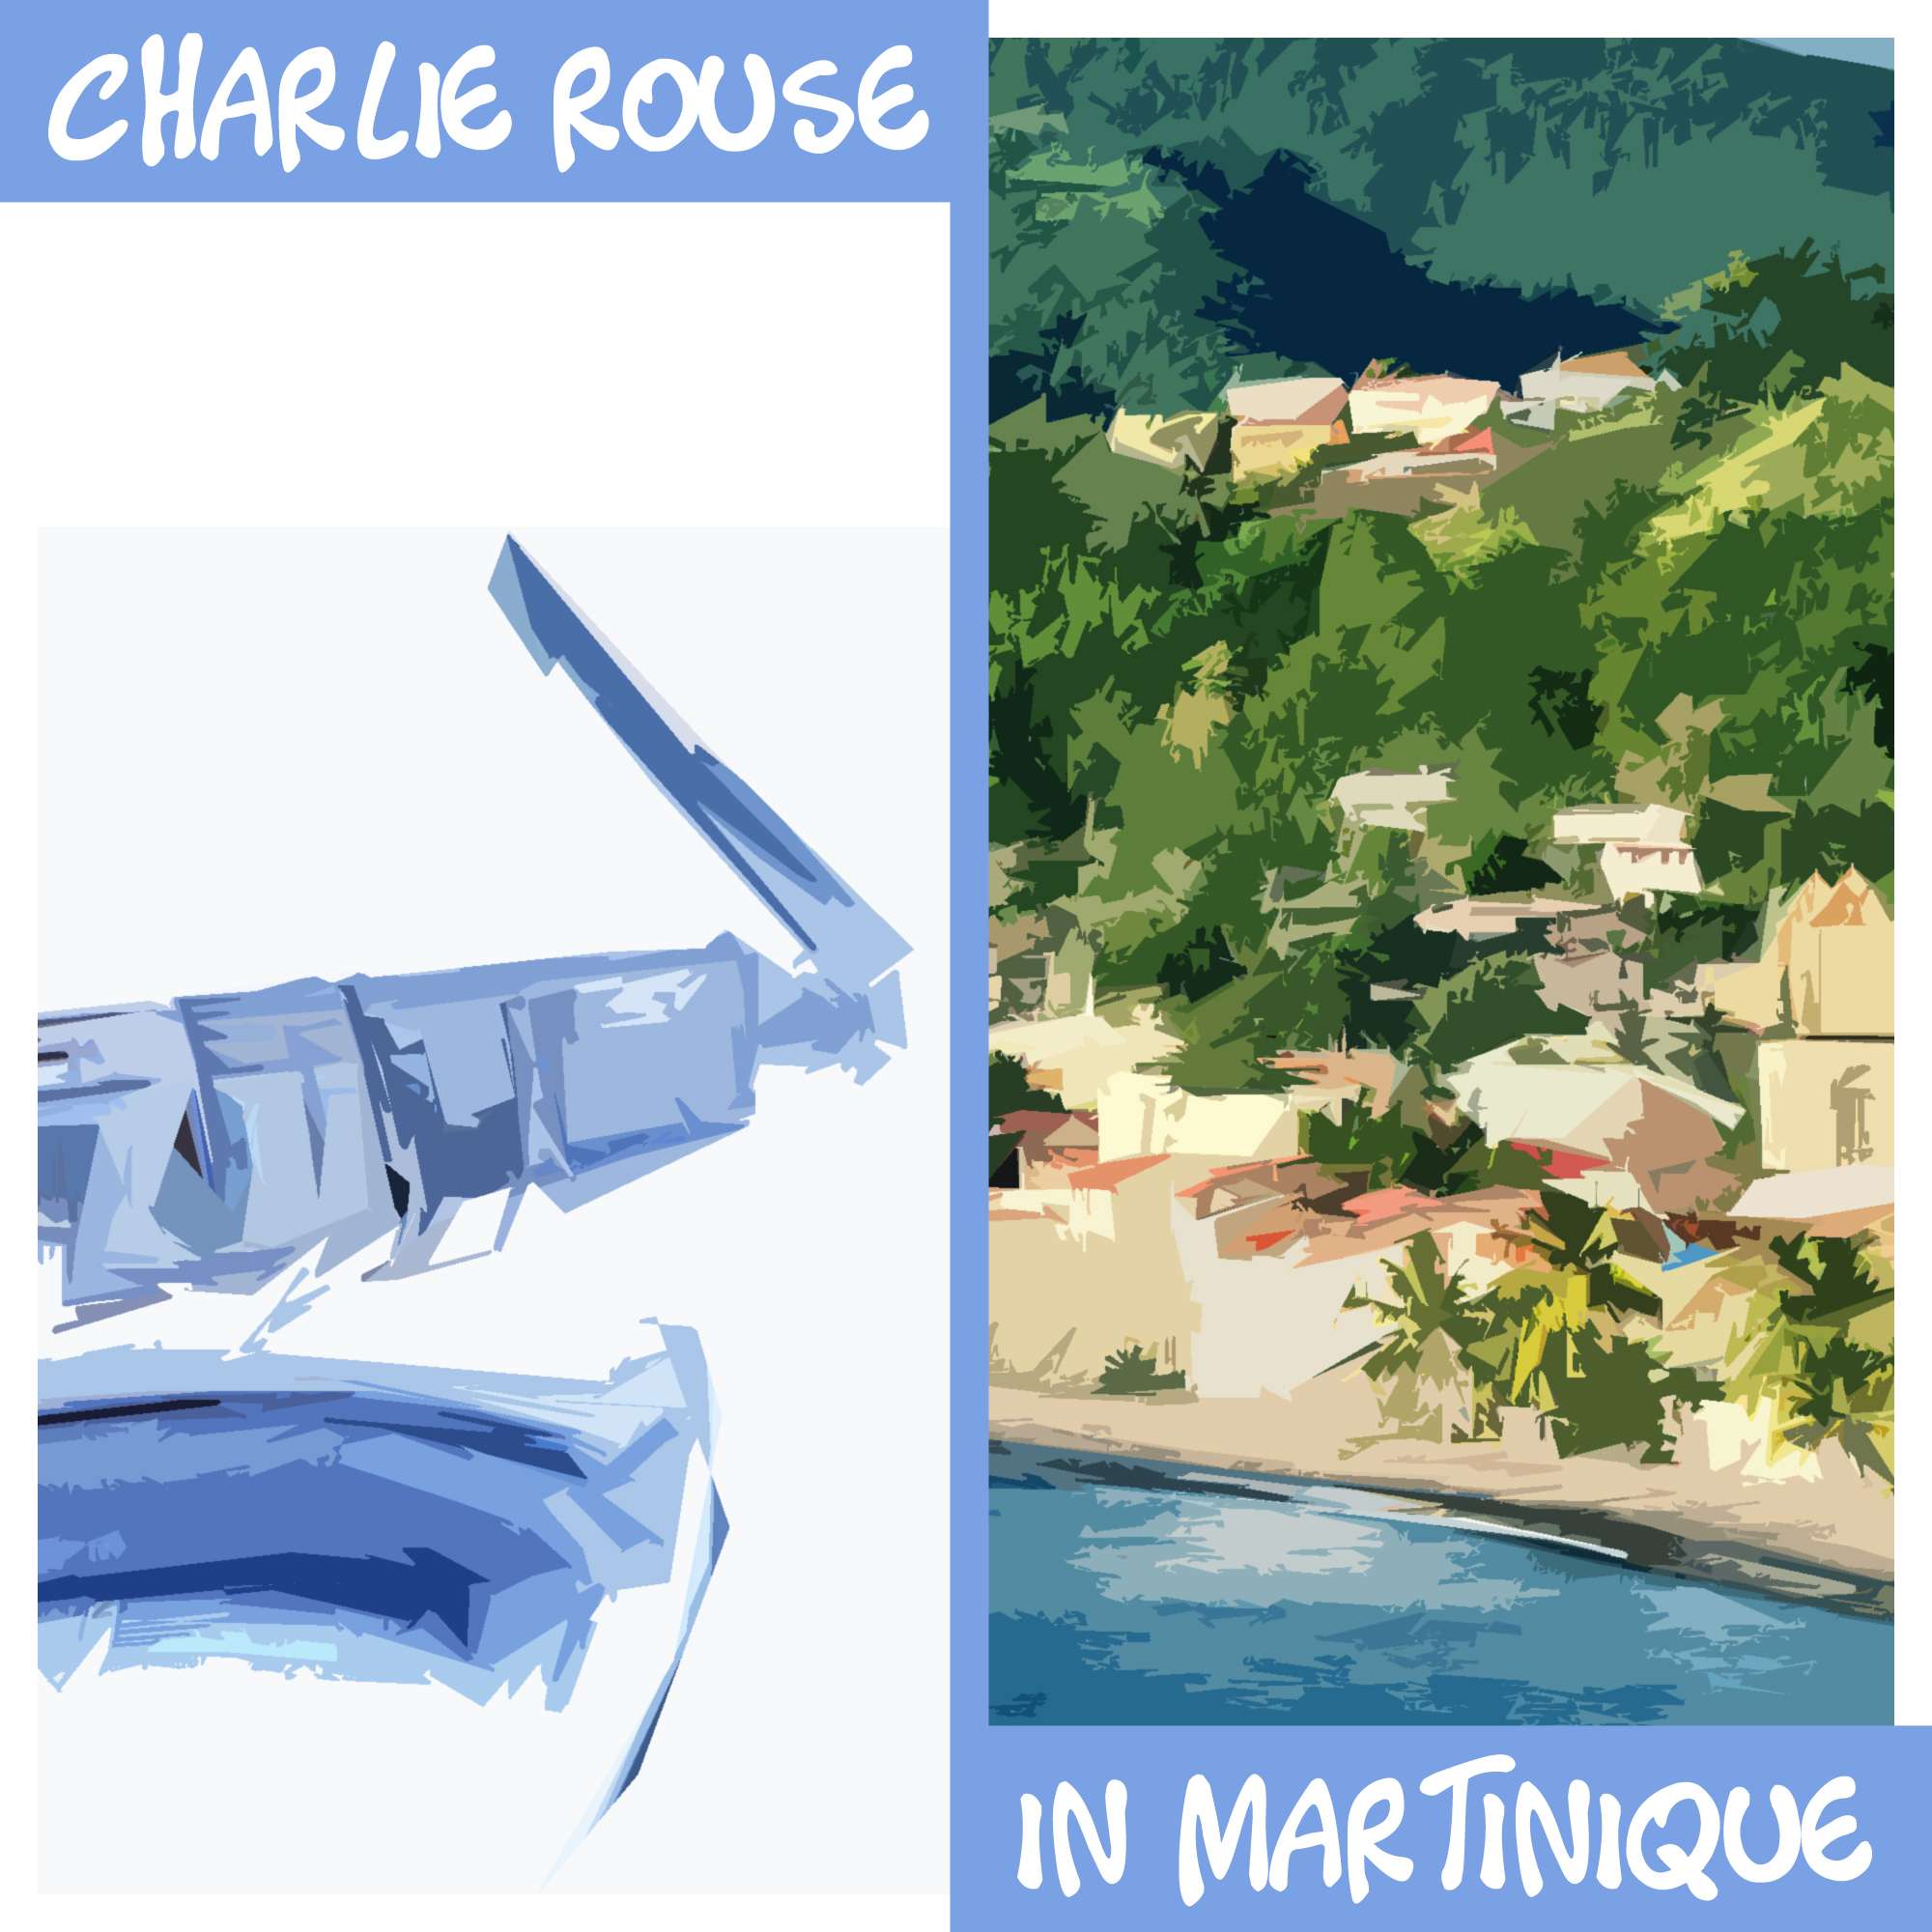 Charlie Rouse - In Martinique